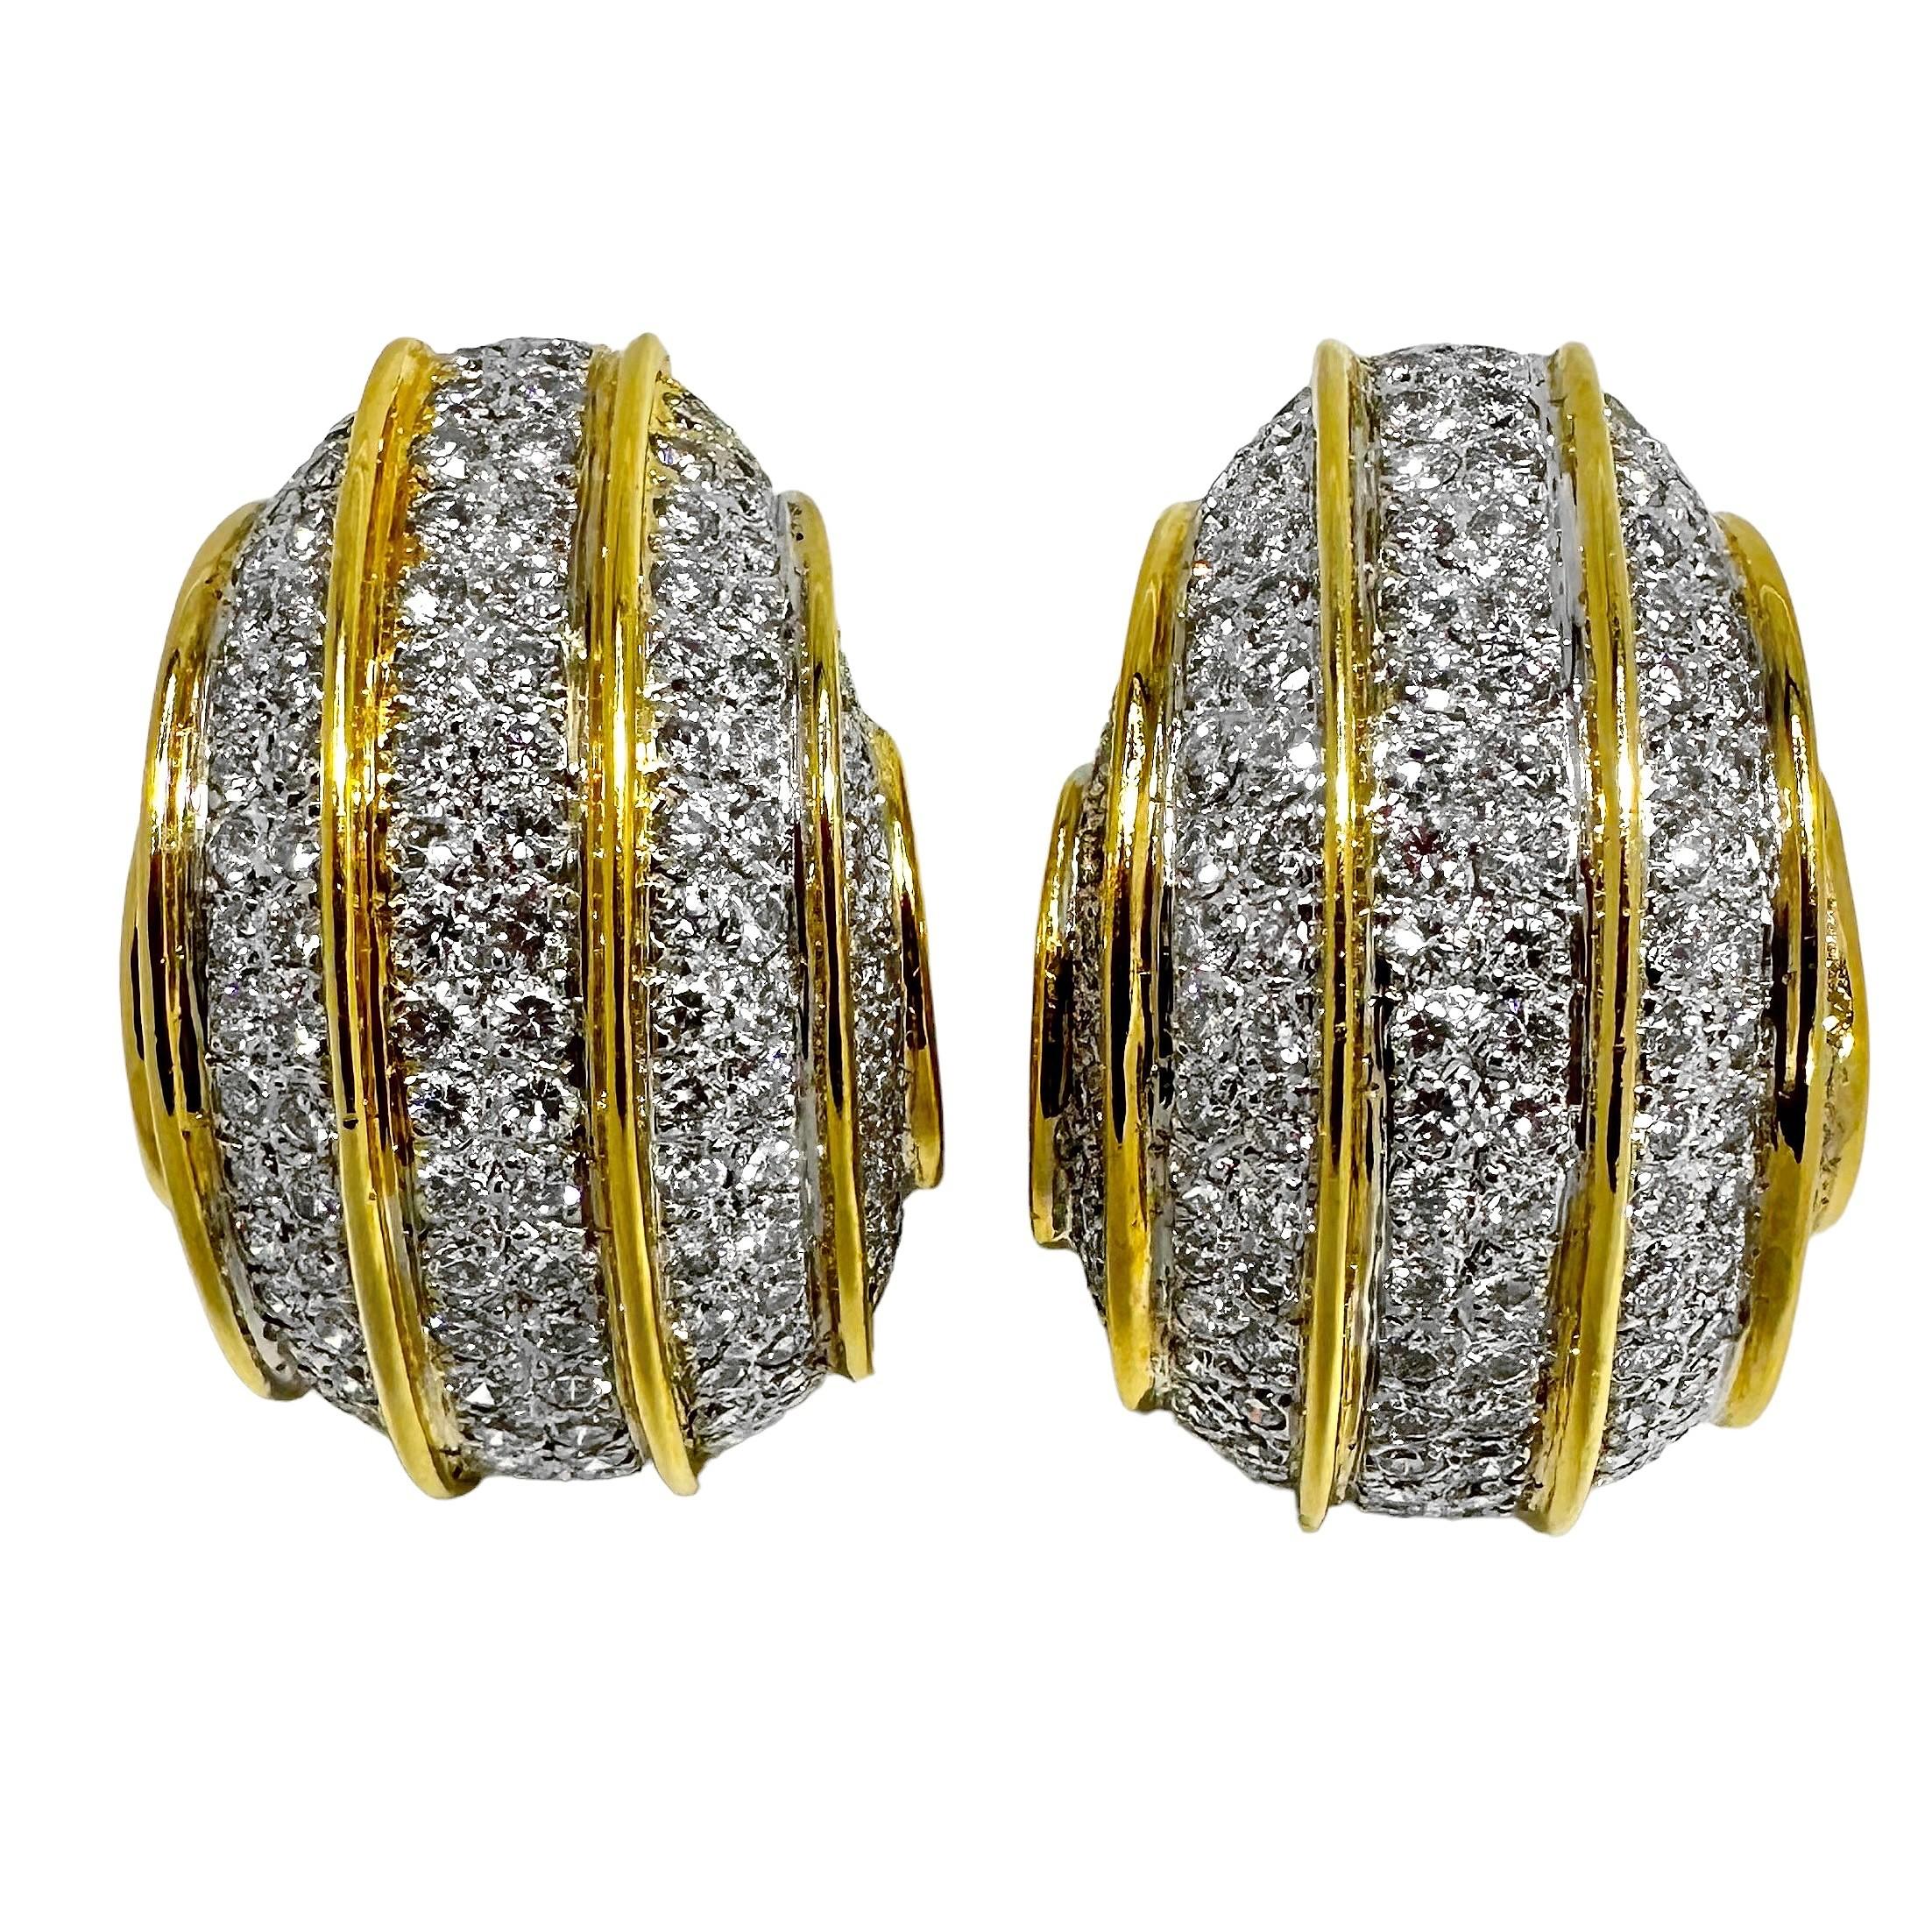 A beautifully constructed and finely finished, vintage pair of large J-hoop 18K gold and diamond earrings. They are set with approximately 500 round brilliant cut diamonds and have a total approximate diamond weight of 10.00ct. Diamonds are of